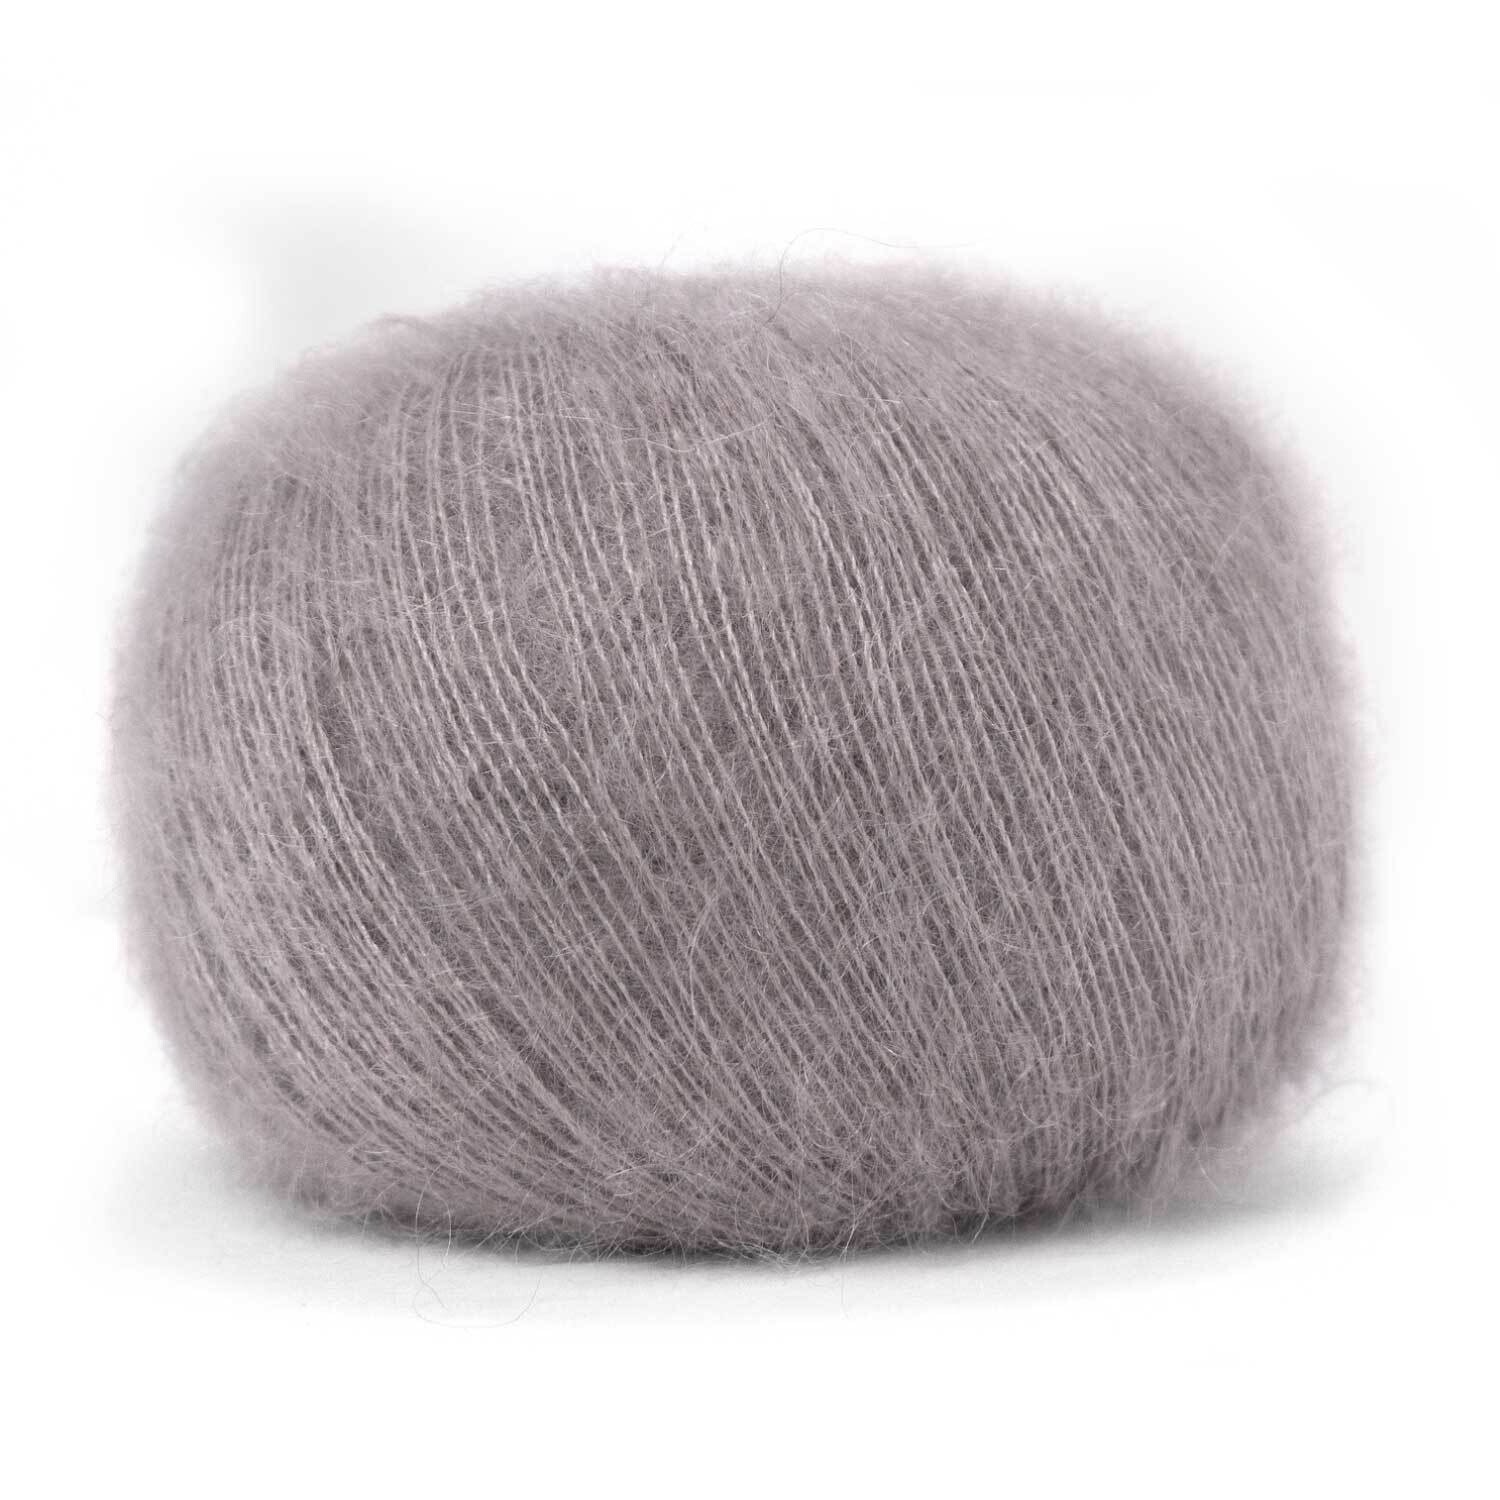 Pascuali Mohair Bliss - 824 Taupe